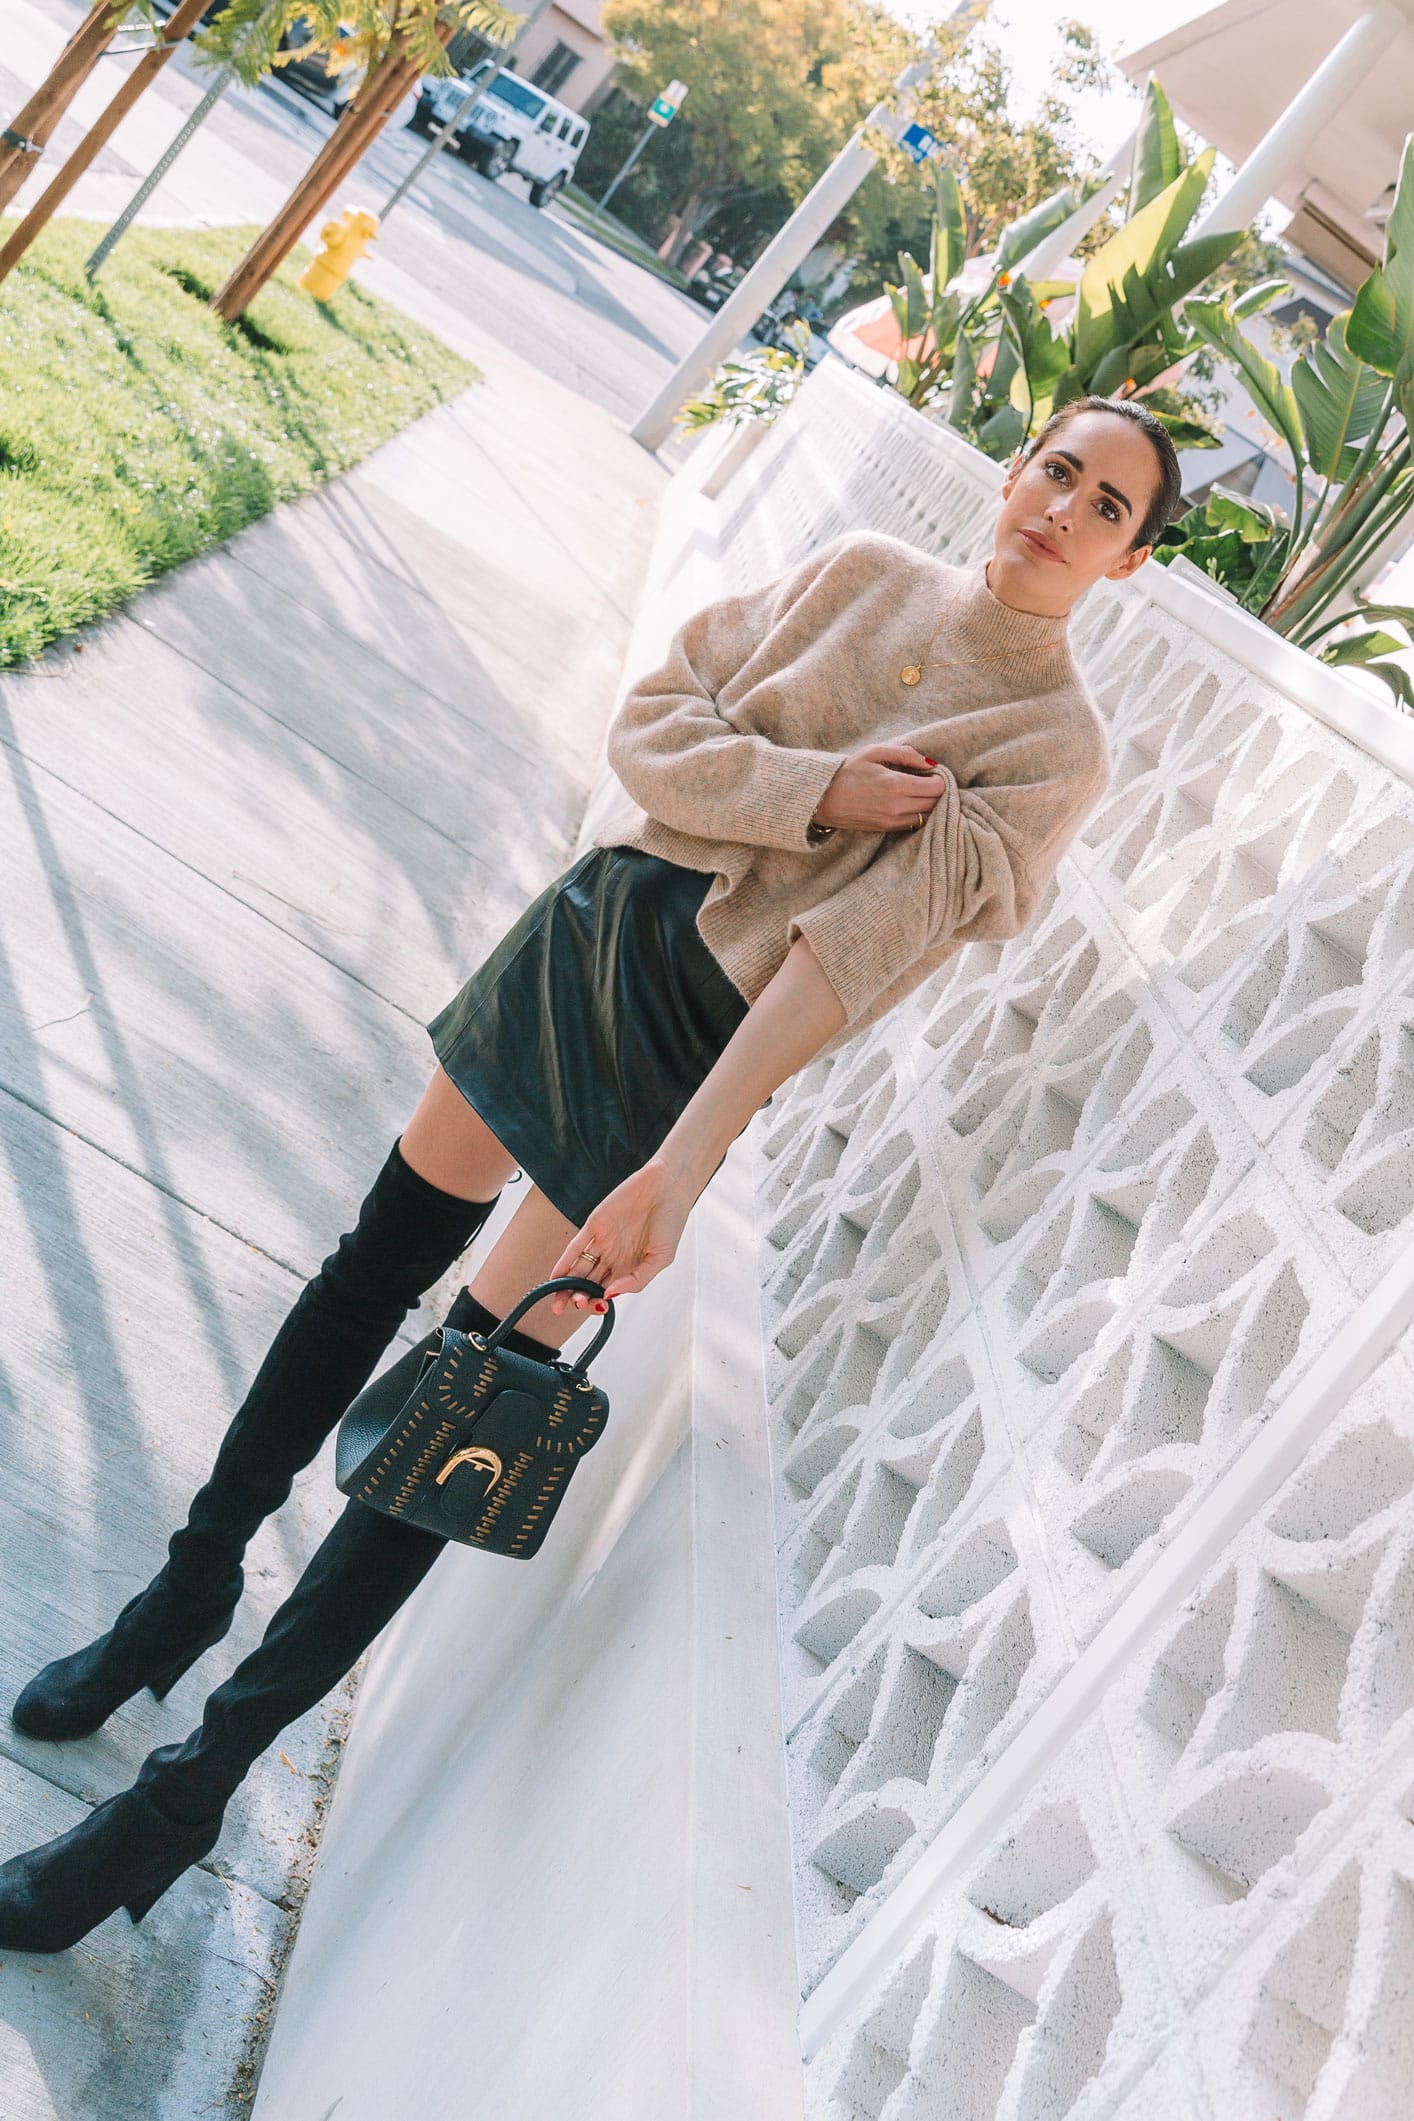 Louise Roe wearing Spring leather mini skirt and boots